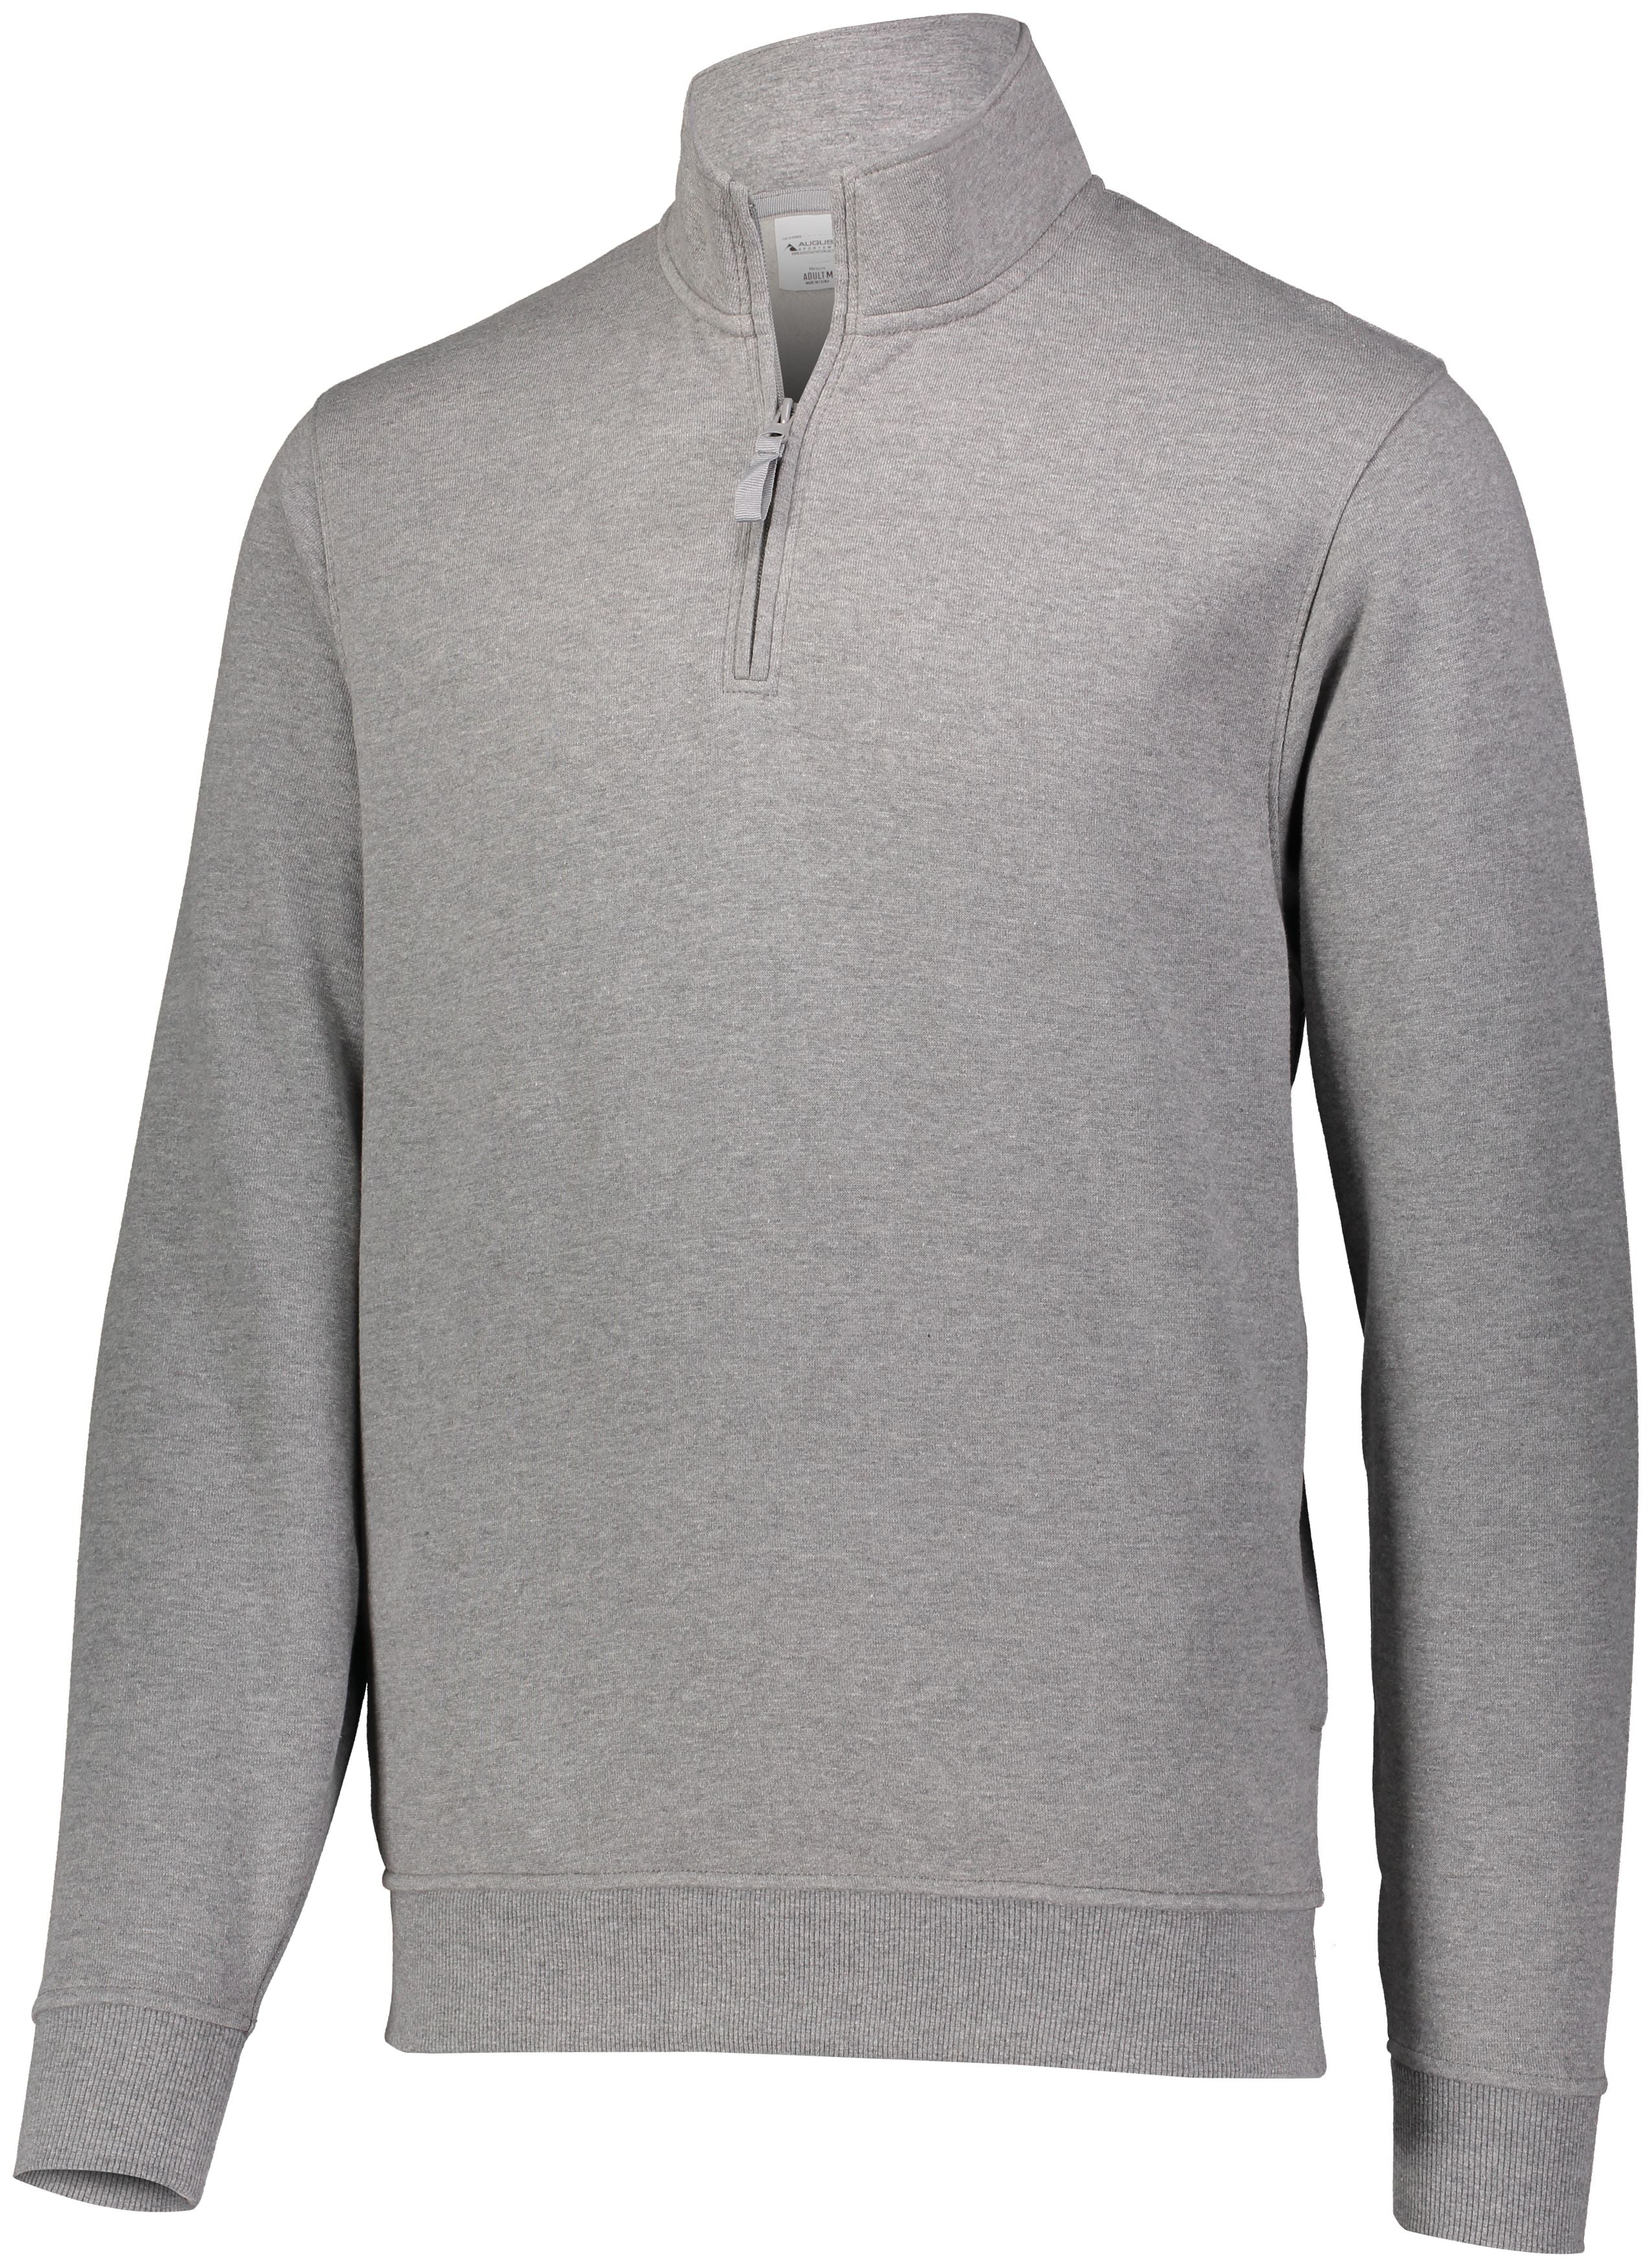 Augusta Sportswear 60/40 Fleece Pullover in Charcoal Heather  -Part of the Adult, Adult-Pullover, Augusta-Products, Outerwear product lines at KanaleyCreations.com